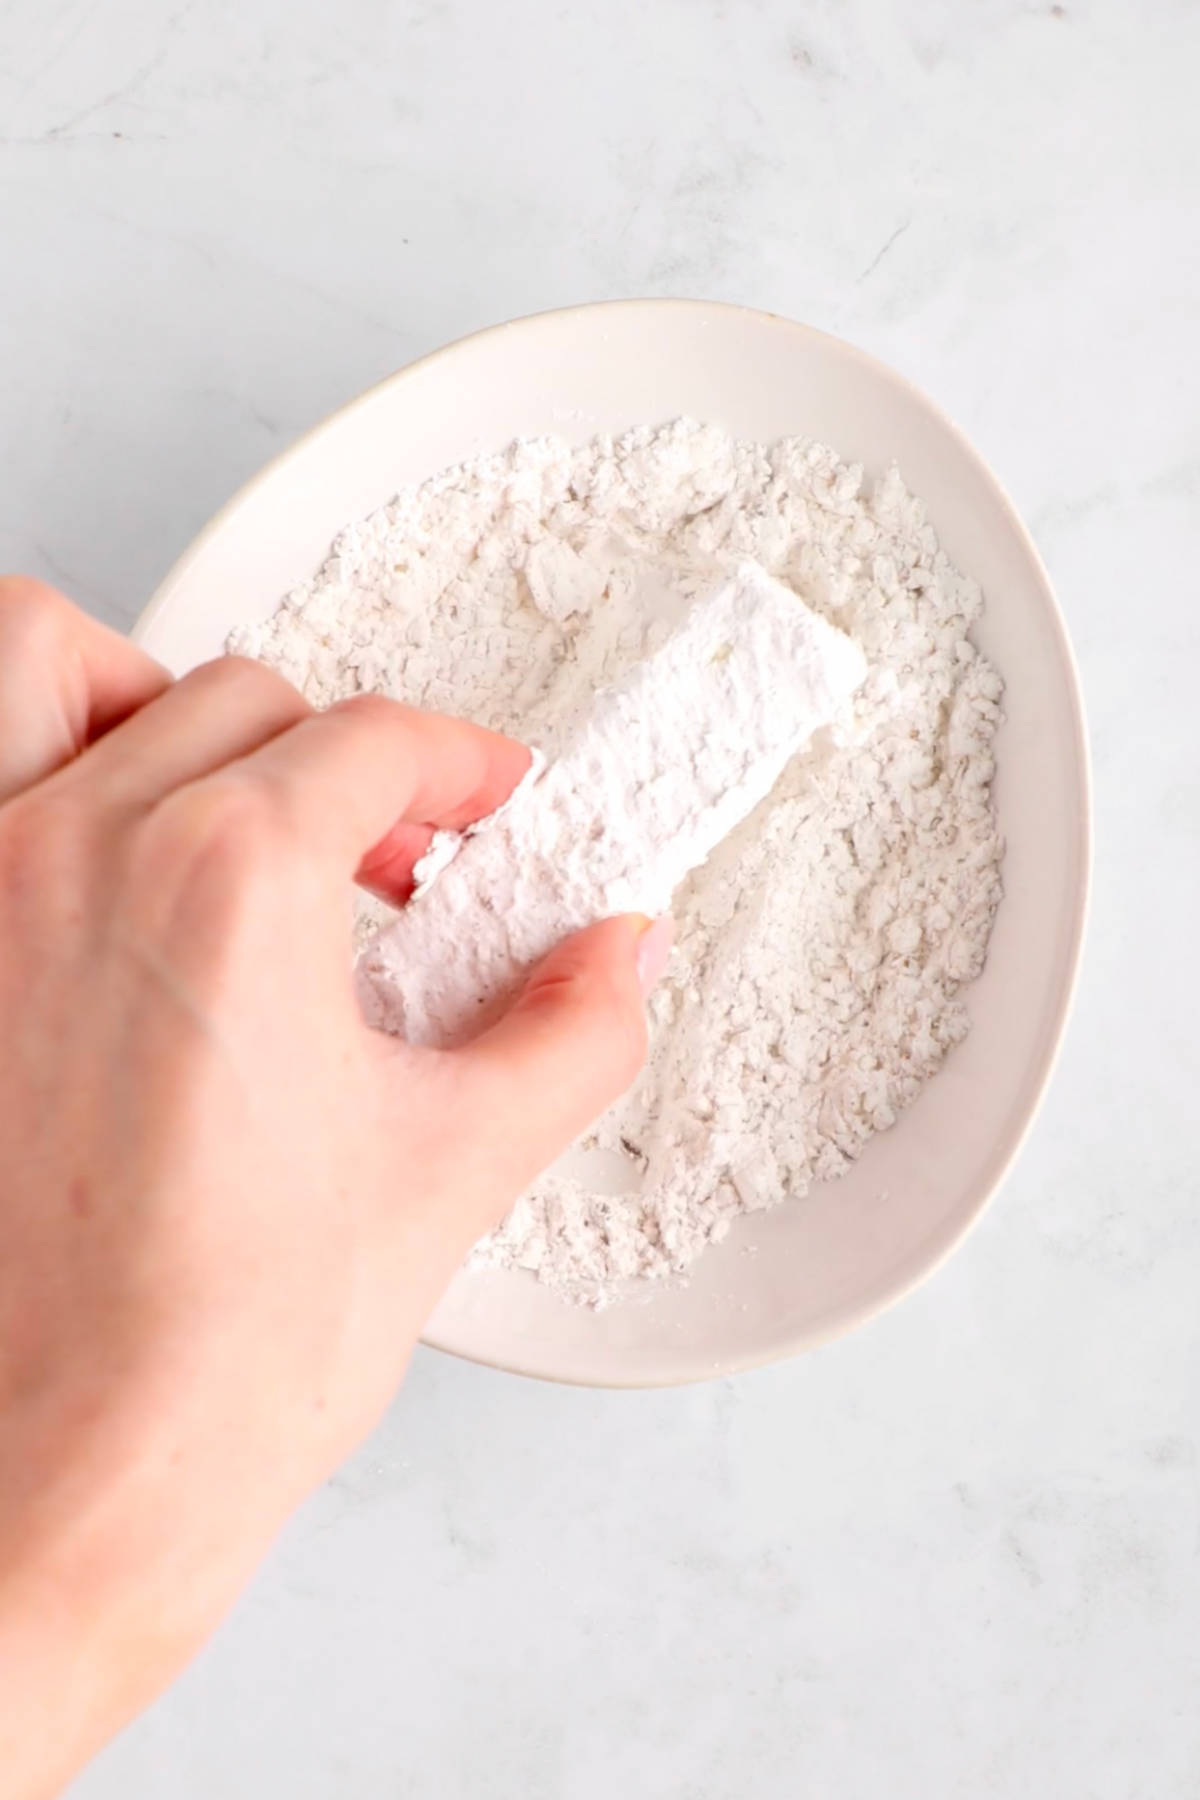 A hand rolling a slice of tofu in a bowl of cornstarch.